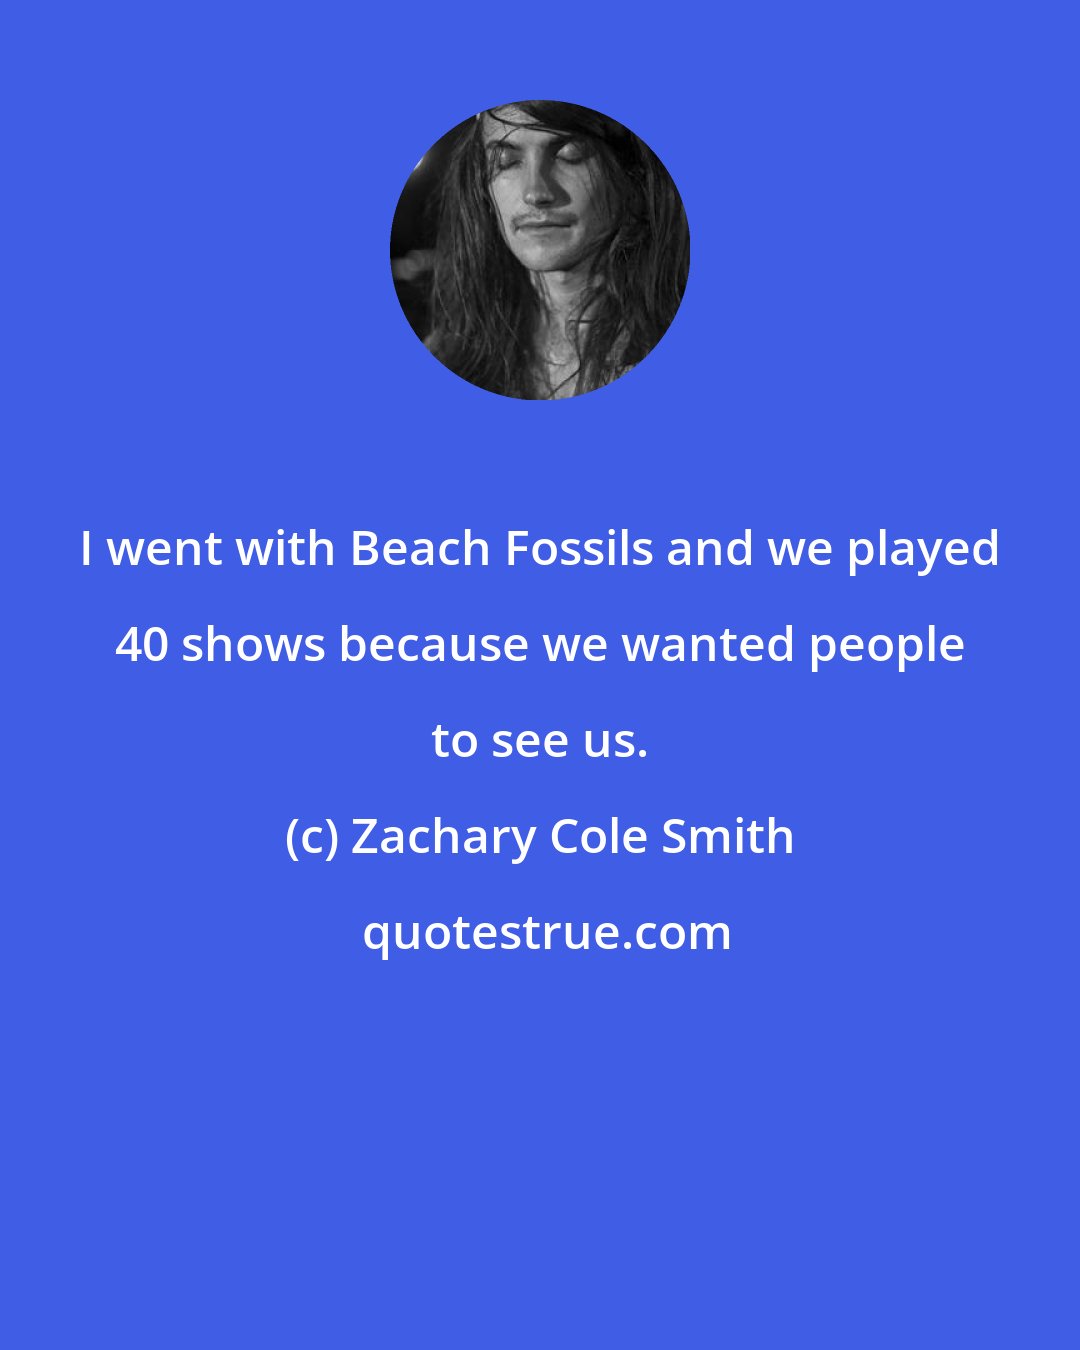 Zachary Cole Smith: I went with Beach Fossils and we played 40 shows because we wanted people to see us.